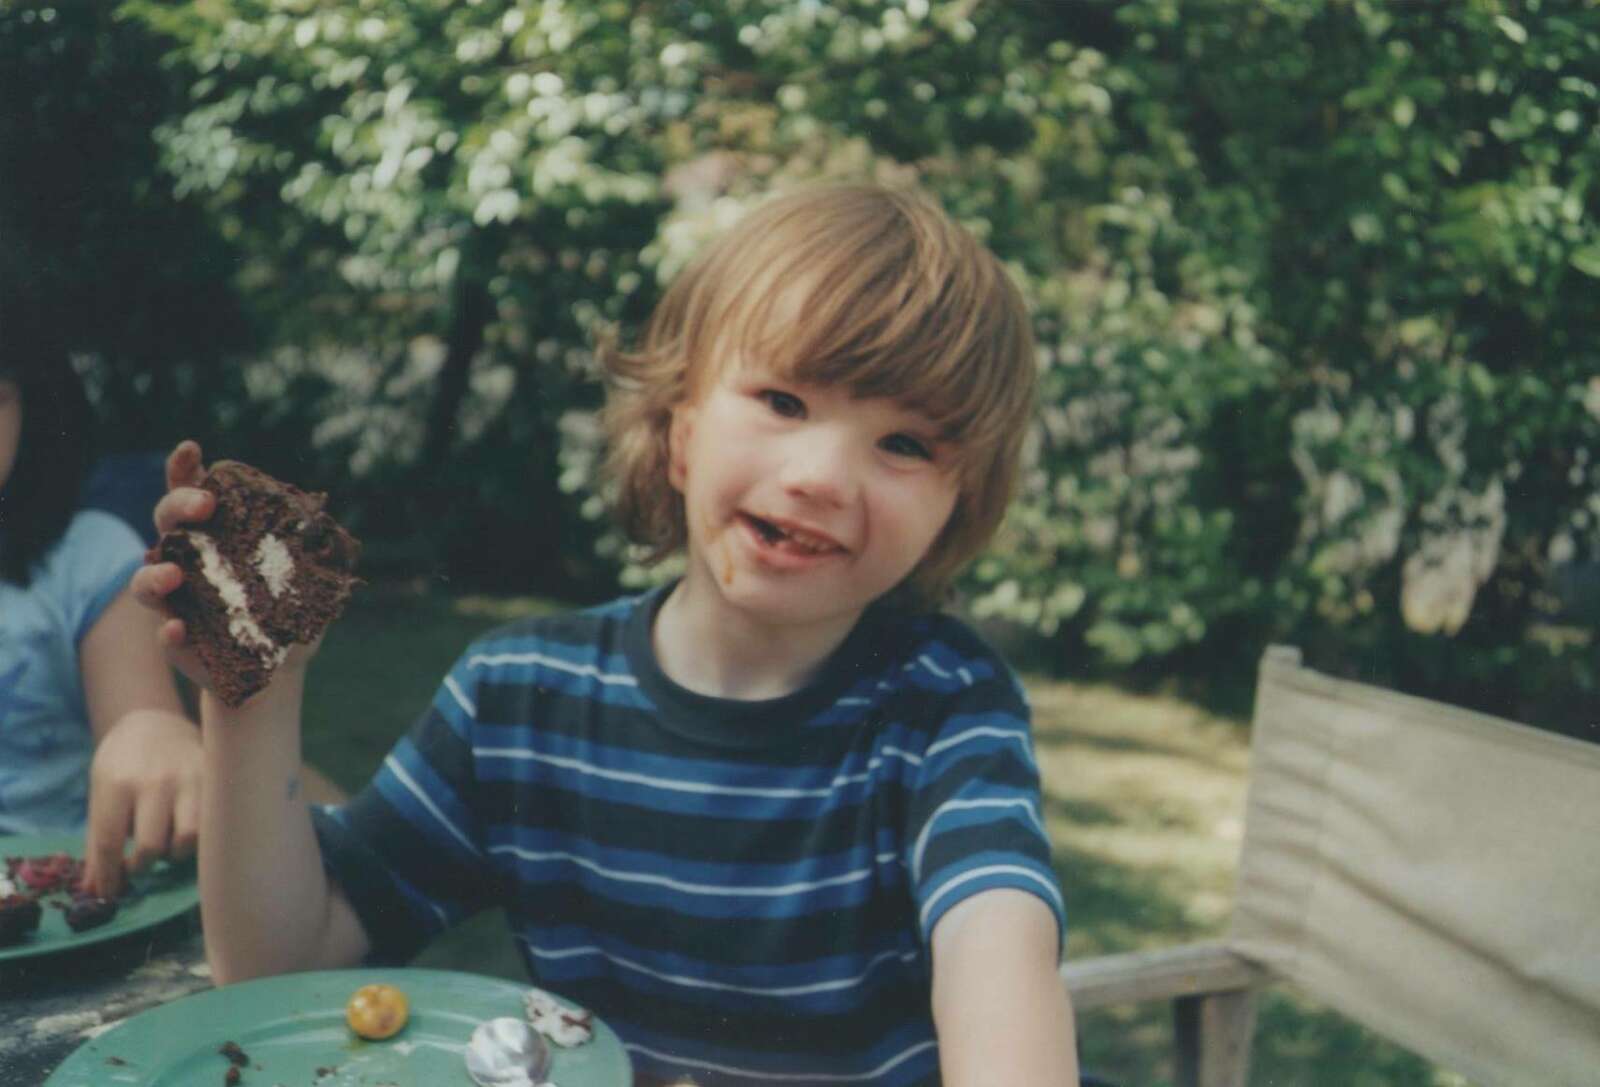 Photo of Zach when he was a child. The image shows a young Zach with brown hair, brown eyes and wearing a blue striped tshirt looking at the camera while holding a slice of chocolate cake as he sits in a garden.